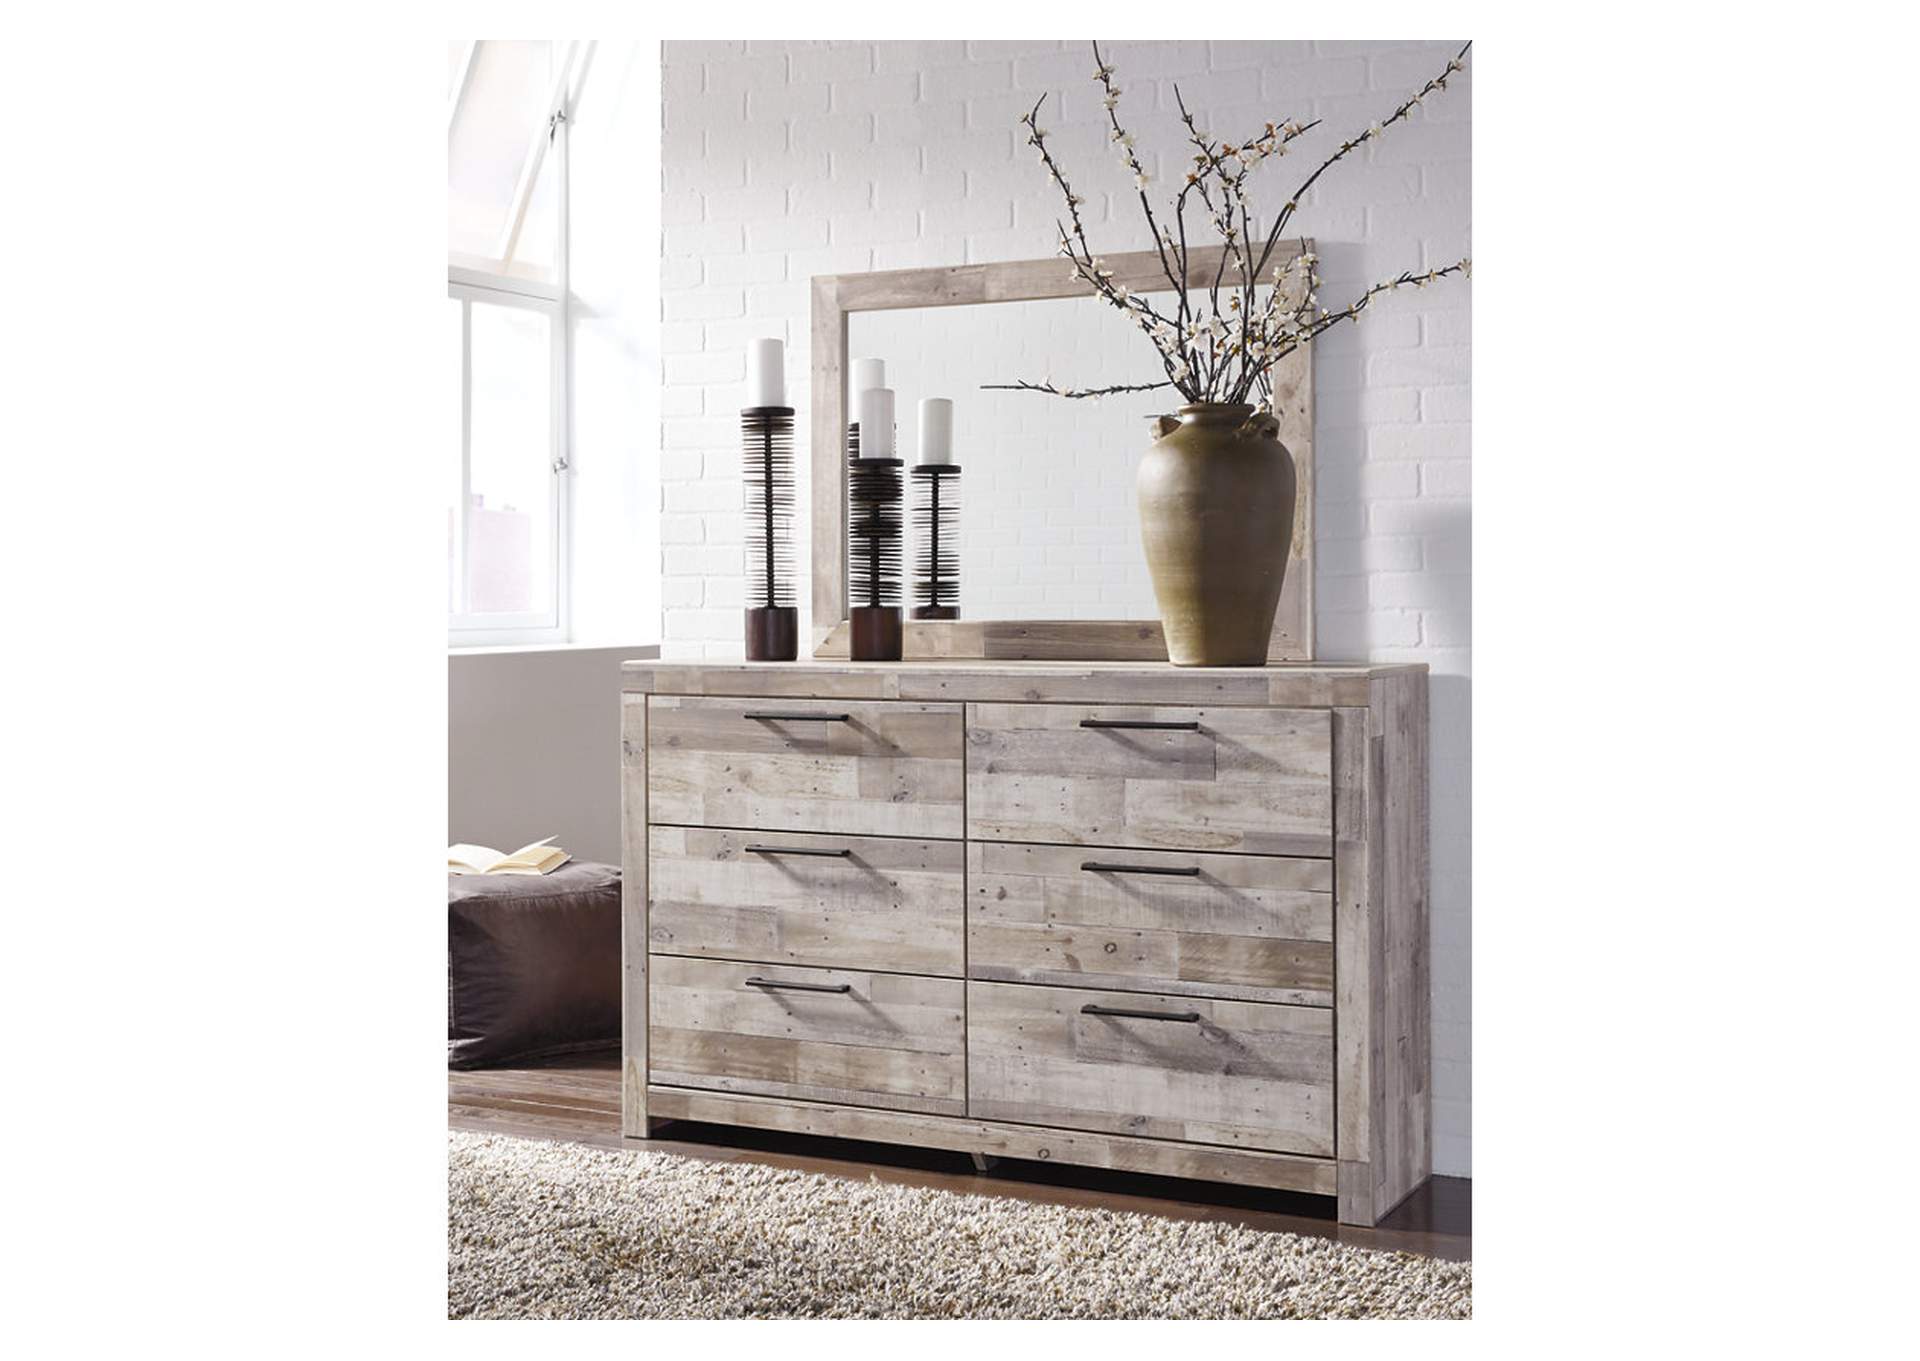 Effie Twin Panel Bed with Mirrored Dresser,Signature Design By Ashley